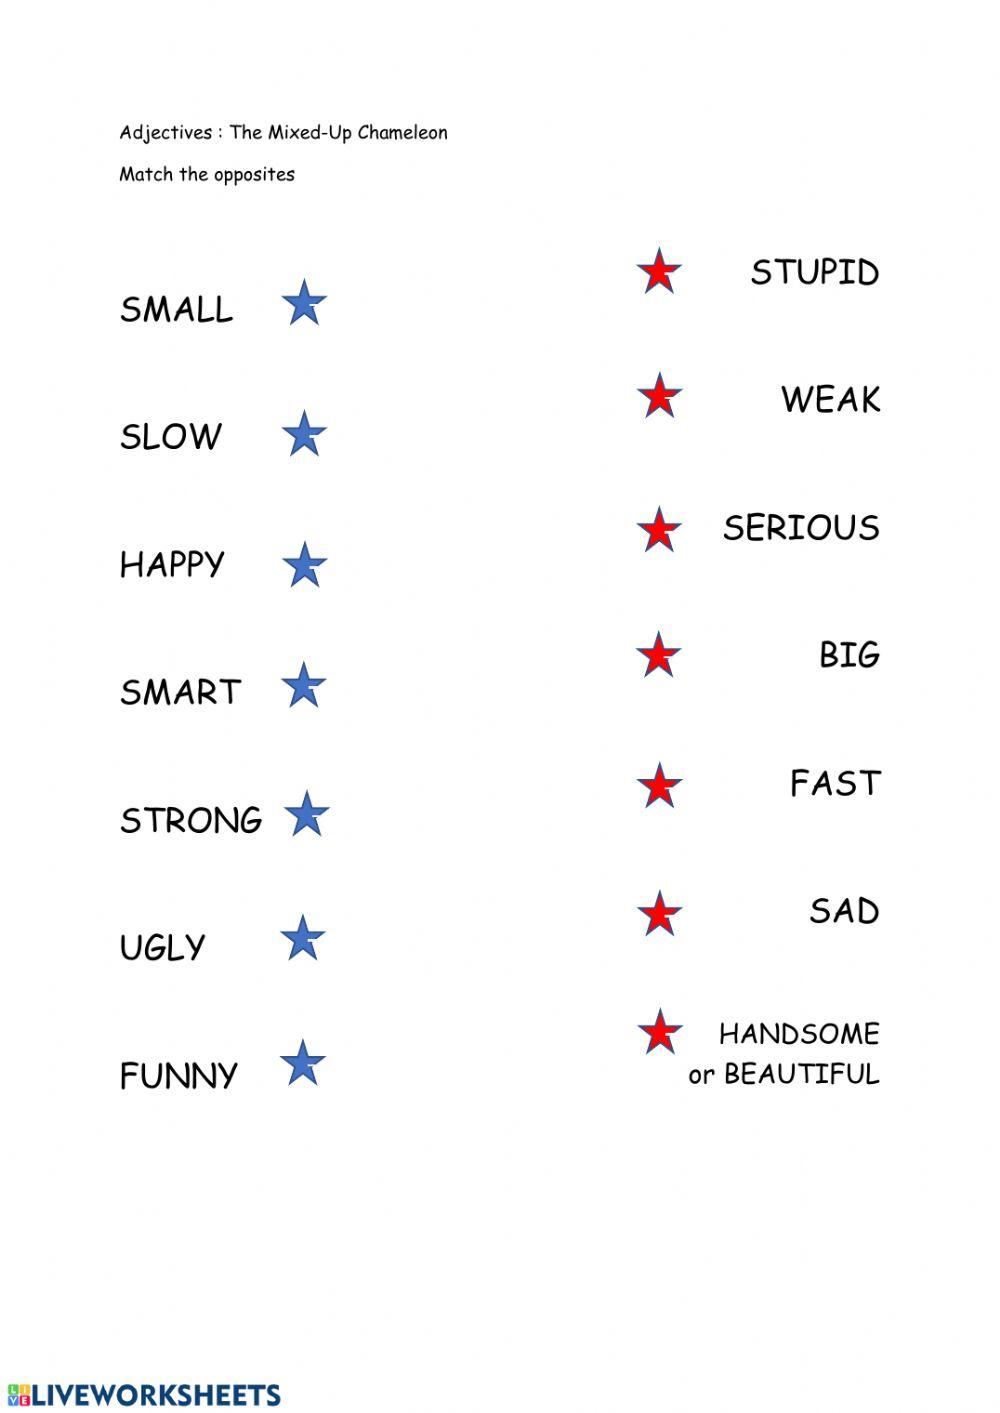 Match the opposite adjectives